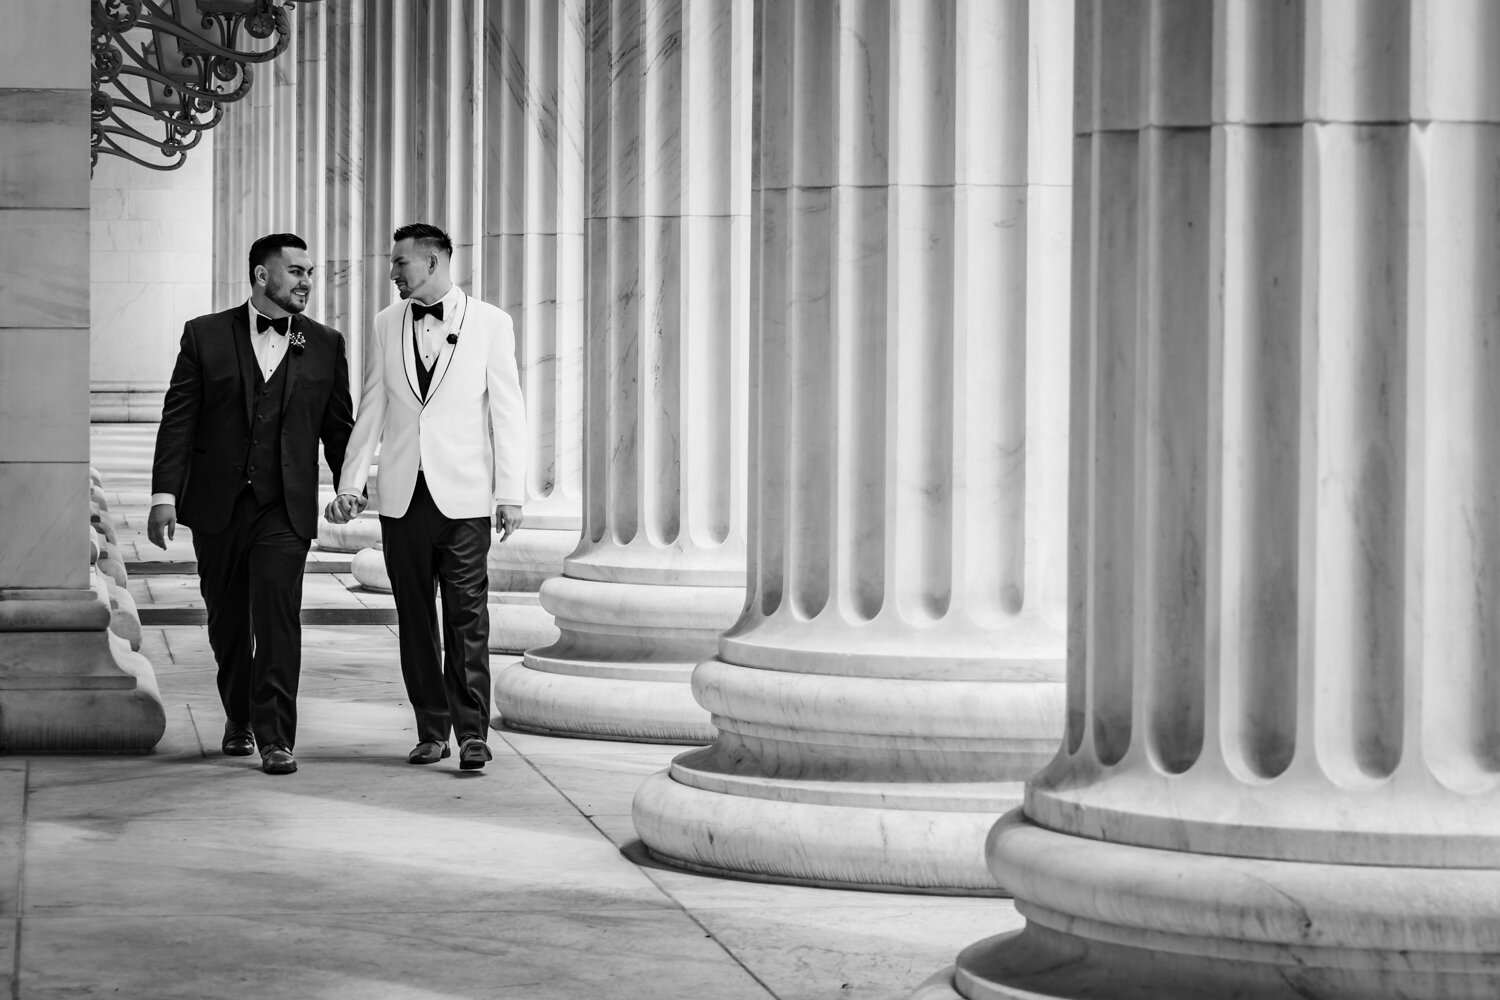  Mile High Station and Roof16 wedding by Denver wedding photographer, JMGant Photography 